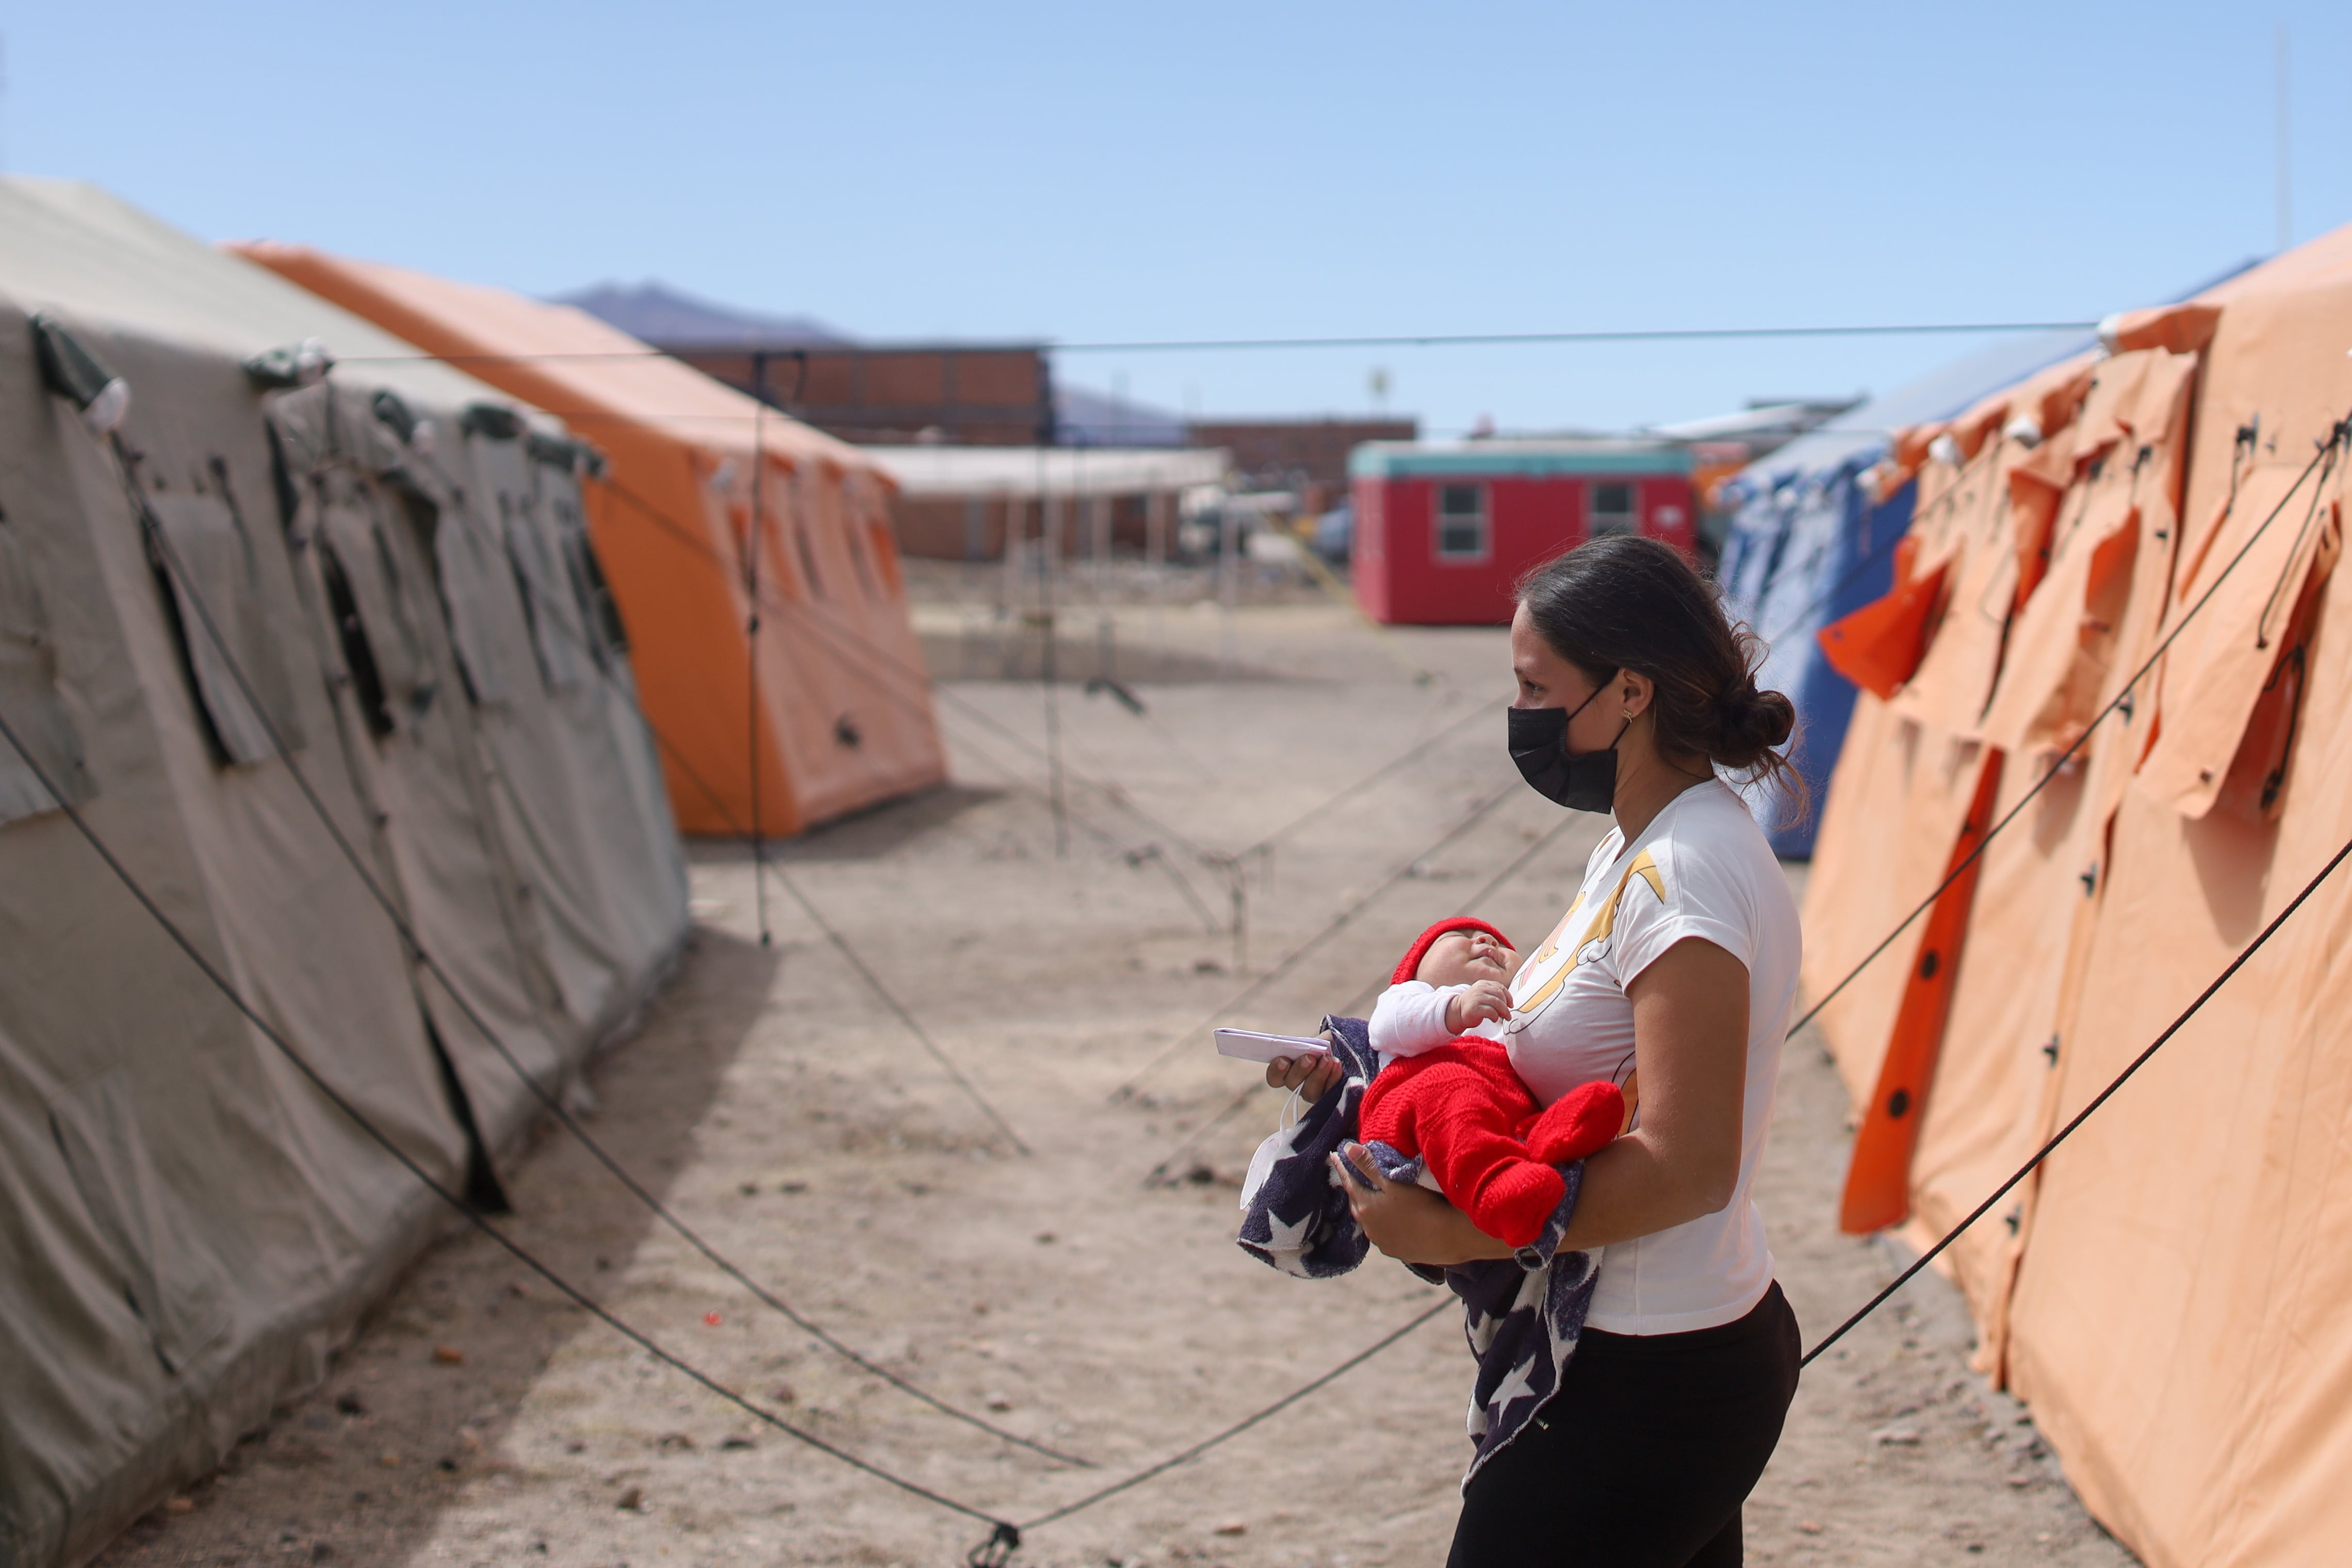 Andrelis Alvarez (21 years old) walks with his son Damian (1 month and a half) in the UNICEF-supported reception center for migrant families located in Colchane, Chile on April 27, 2022.